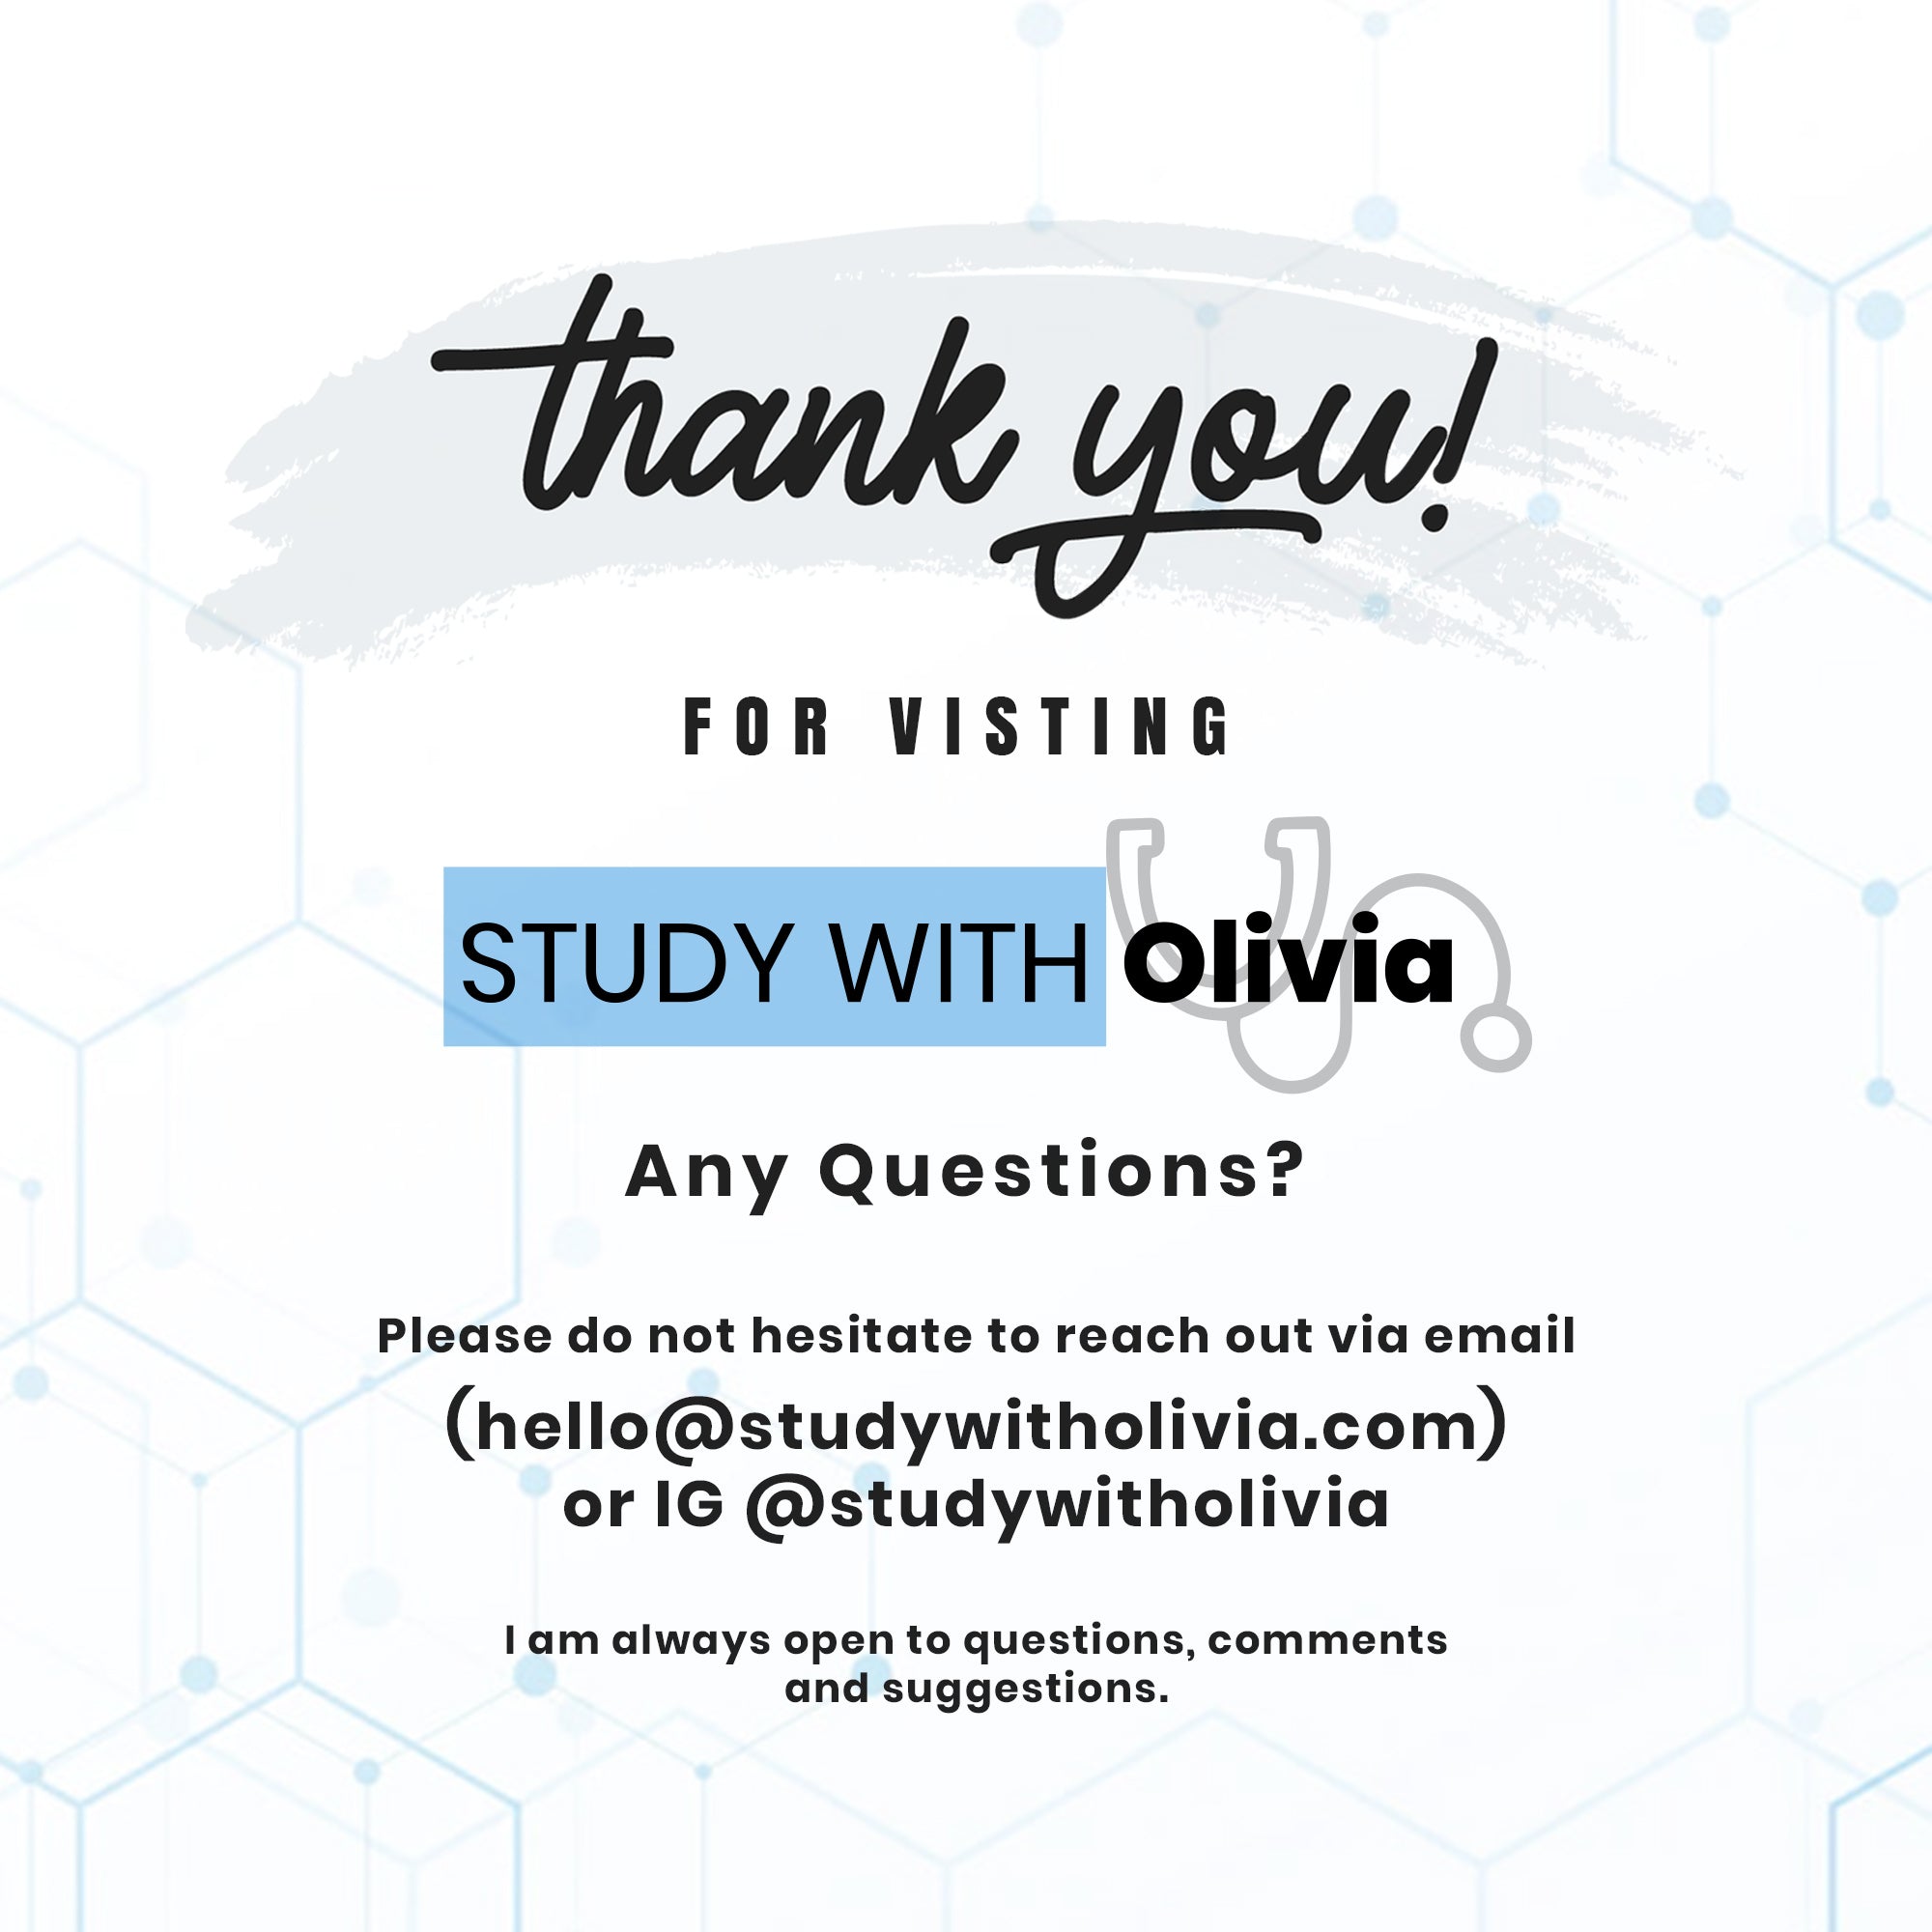 Thank you! for Visiting Study with Olivia